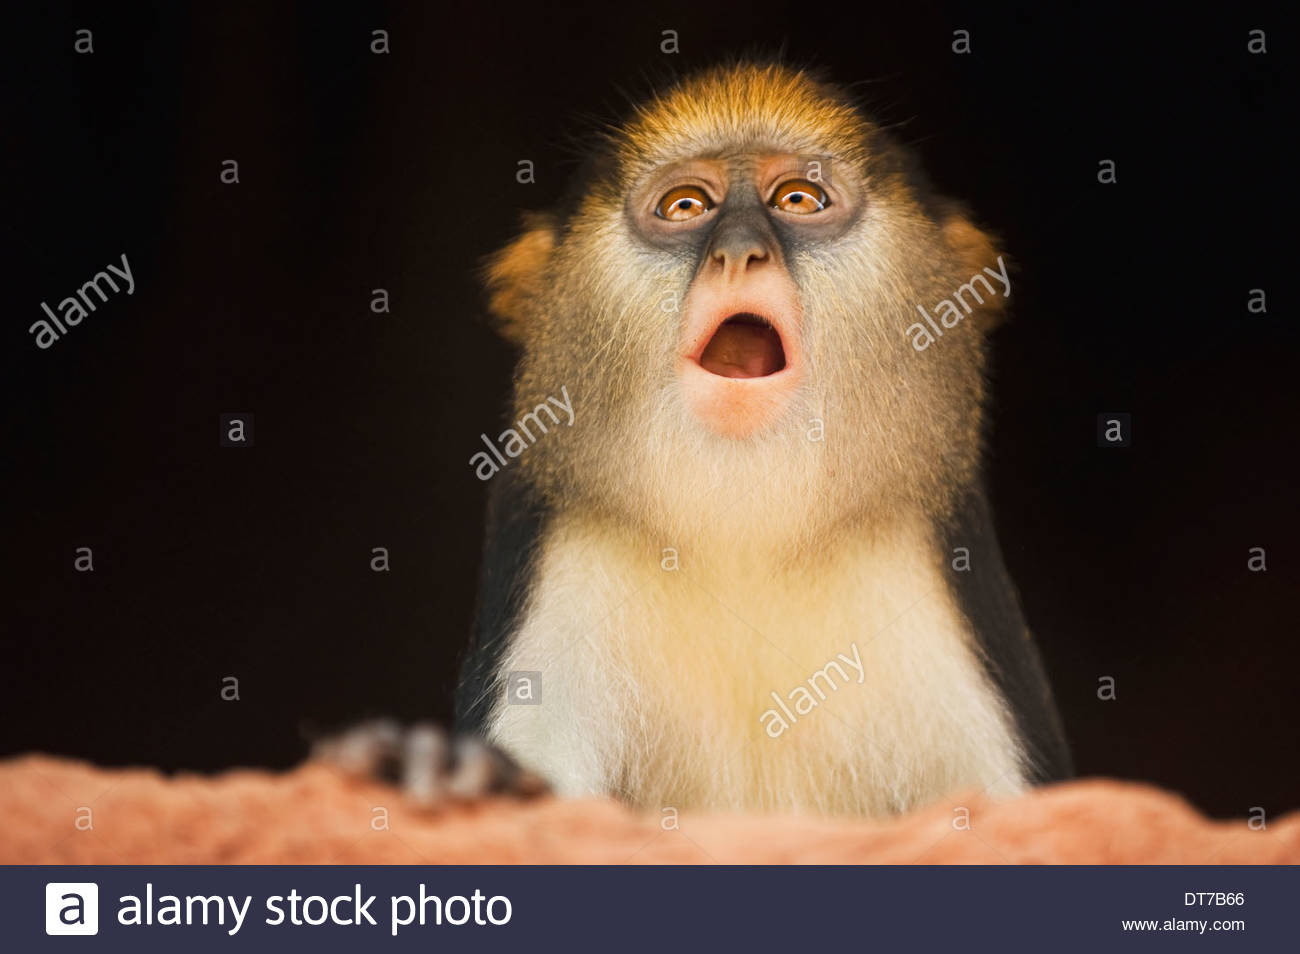 Haus Affe
 Monkey With Mouth Open Stockfotos & Monkey With Mouth Open